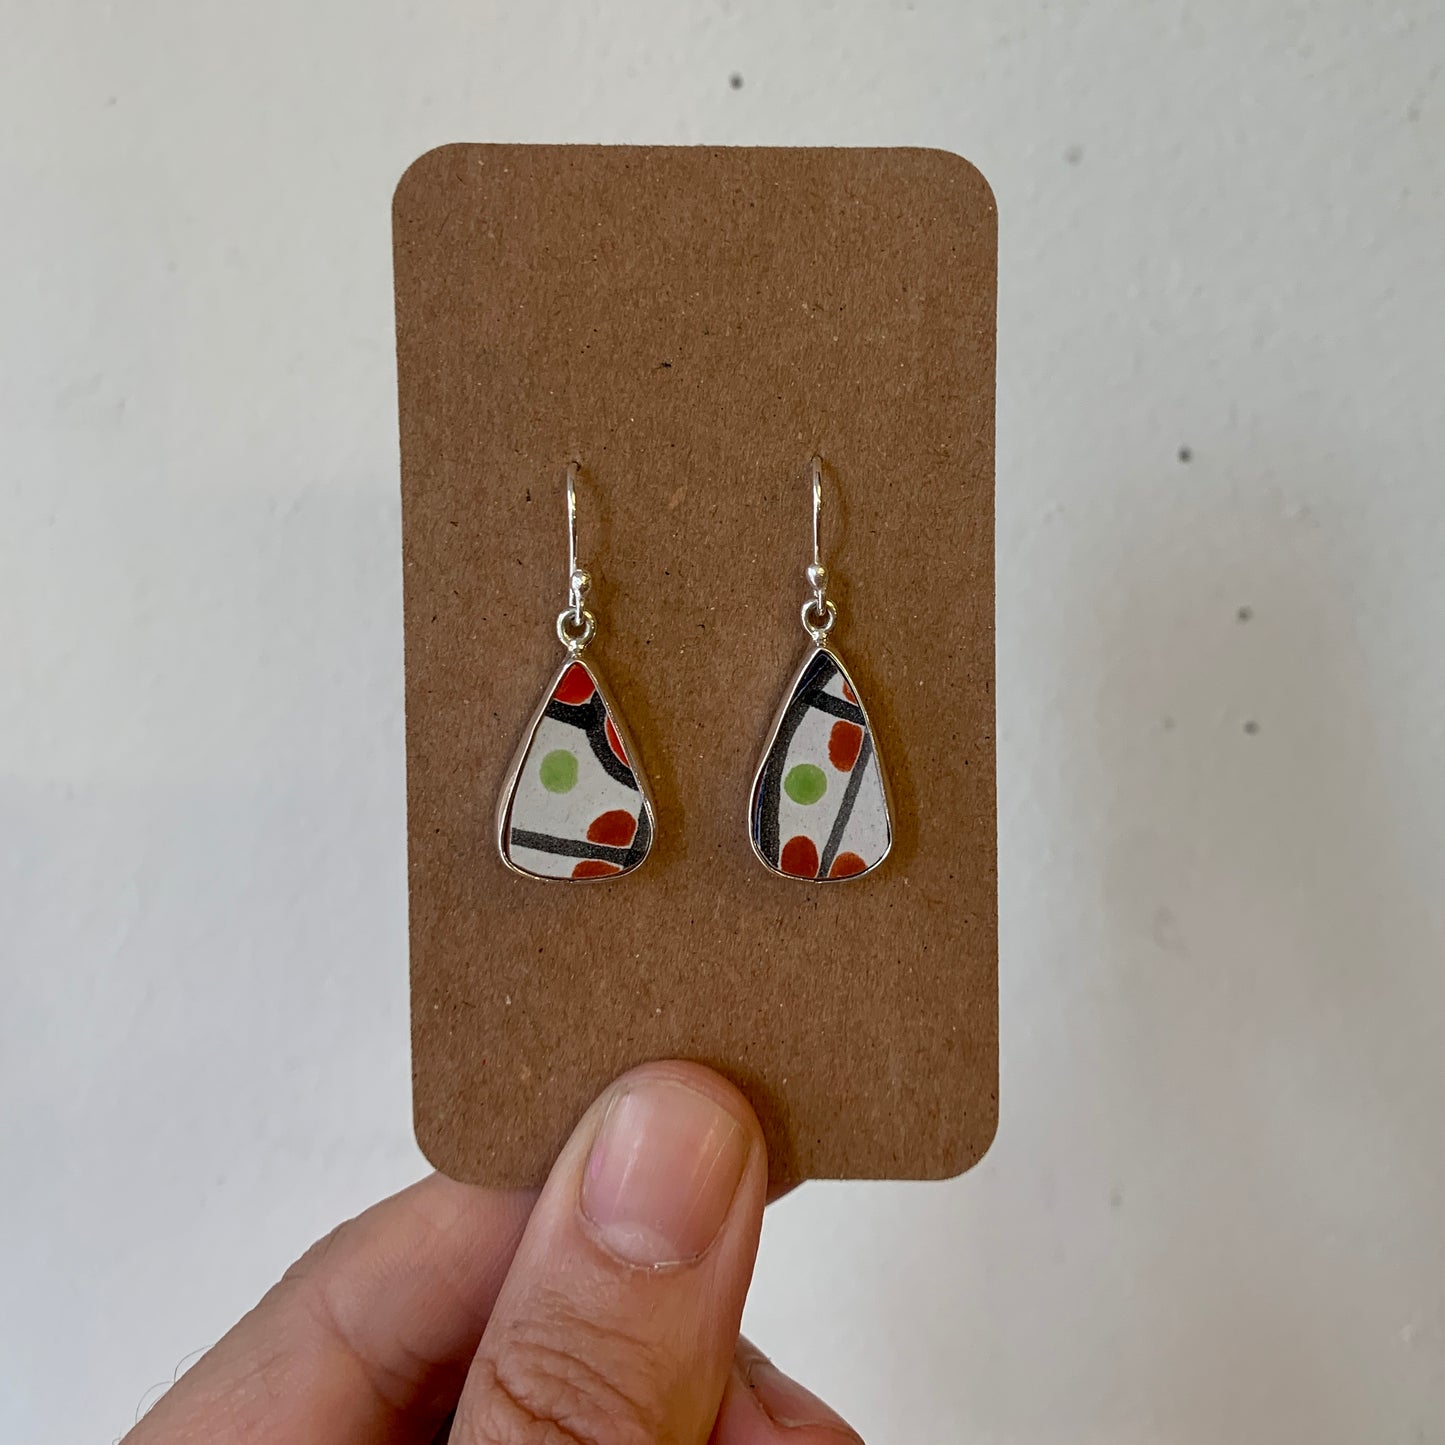 Earrings with a Story #11